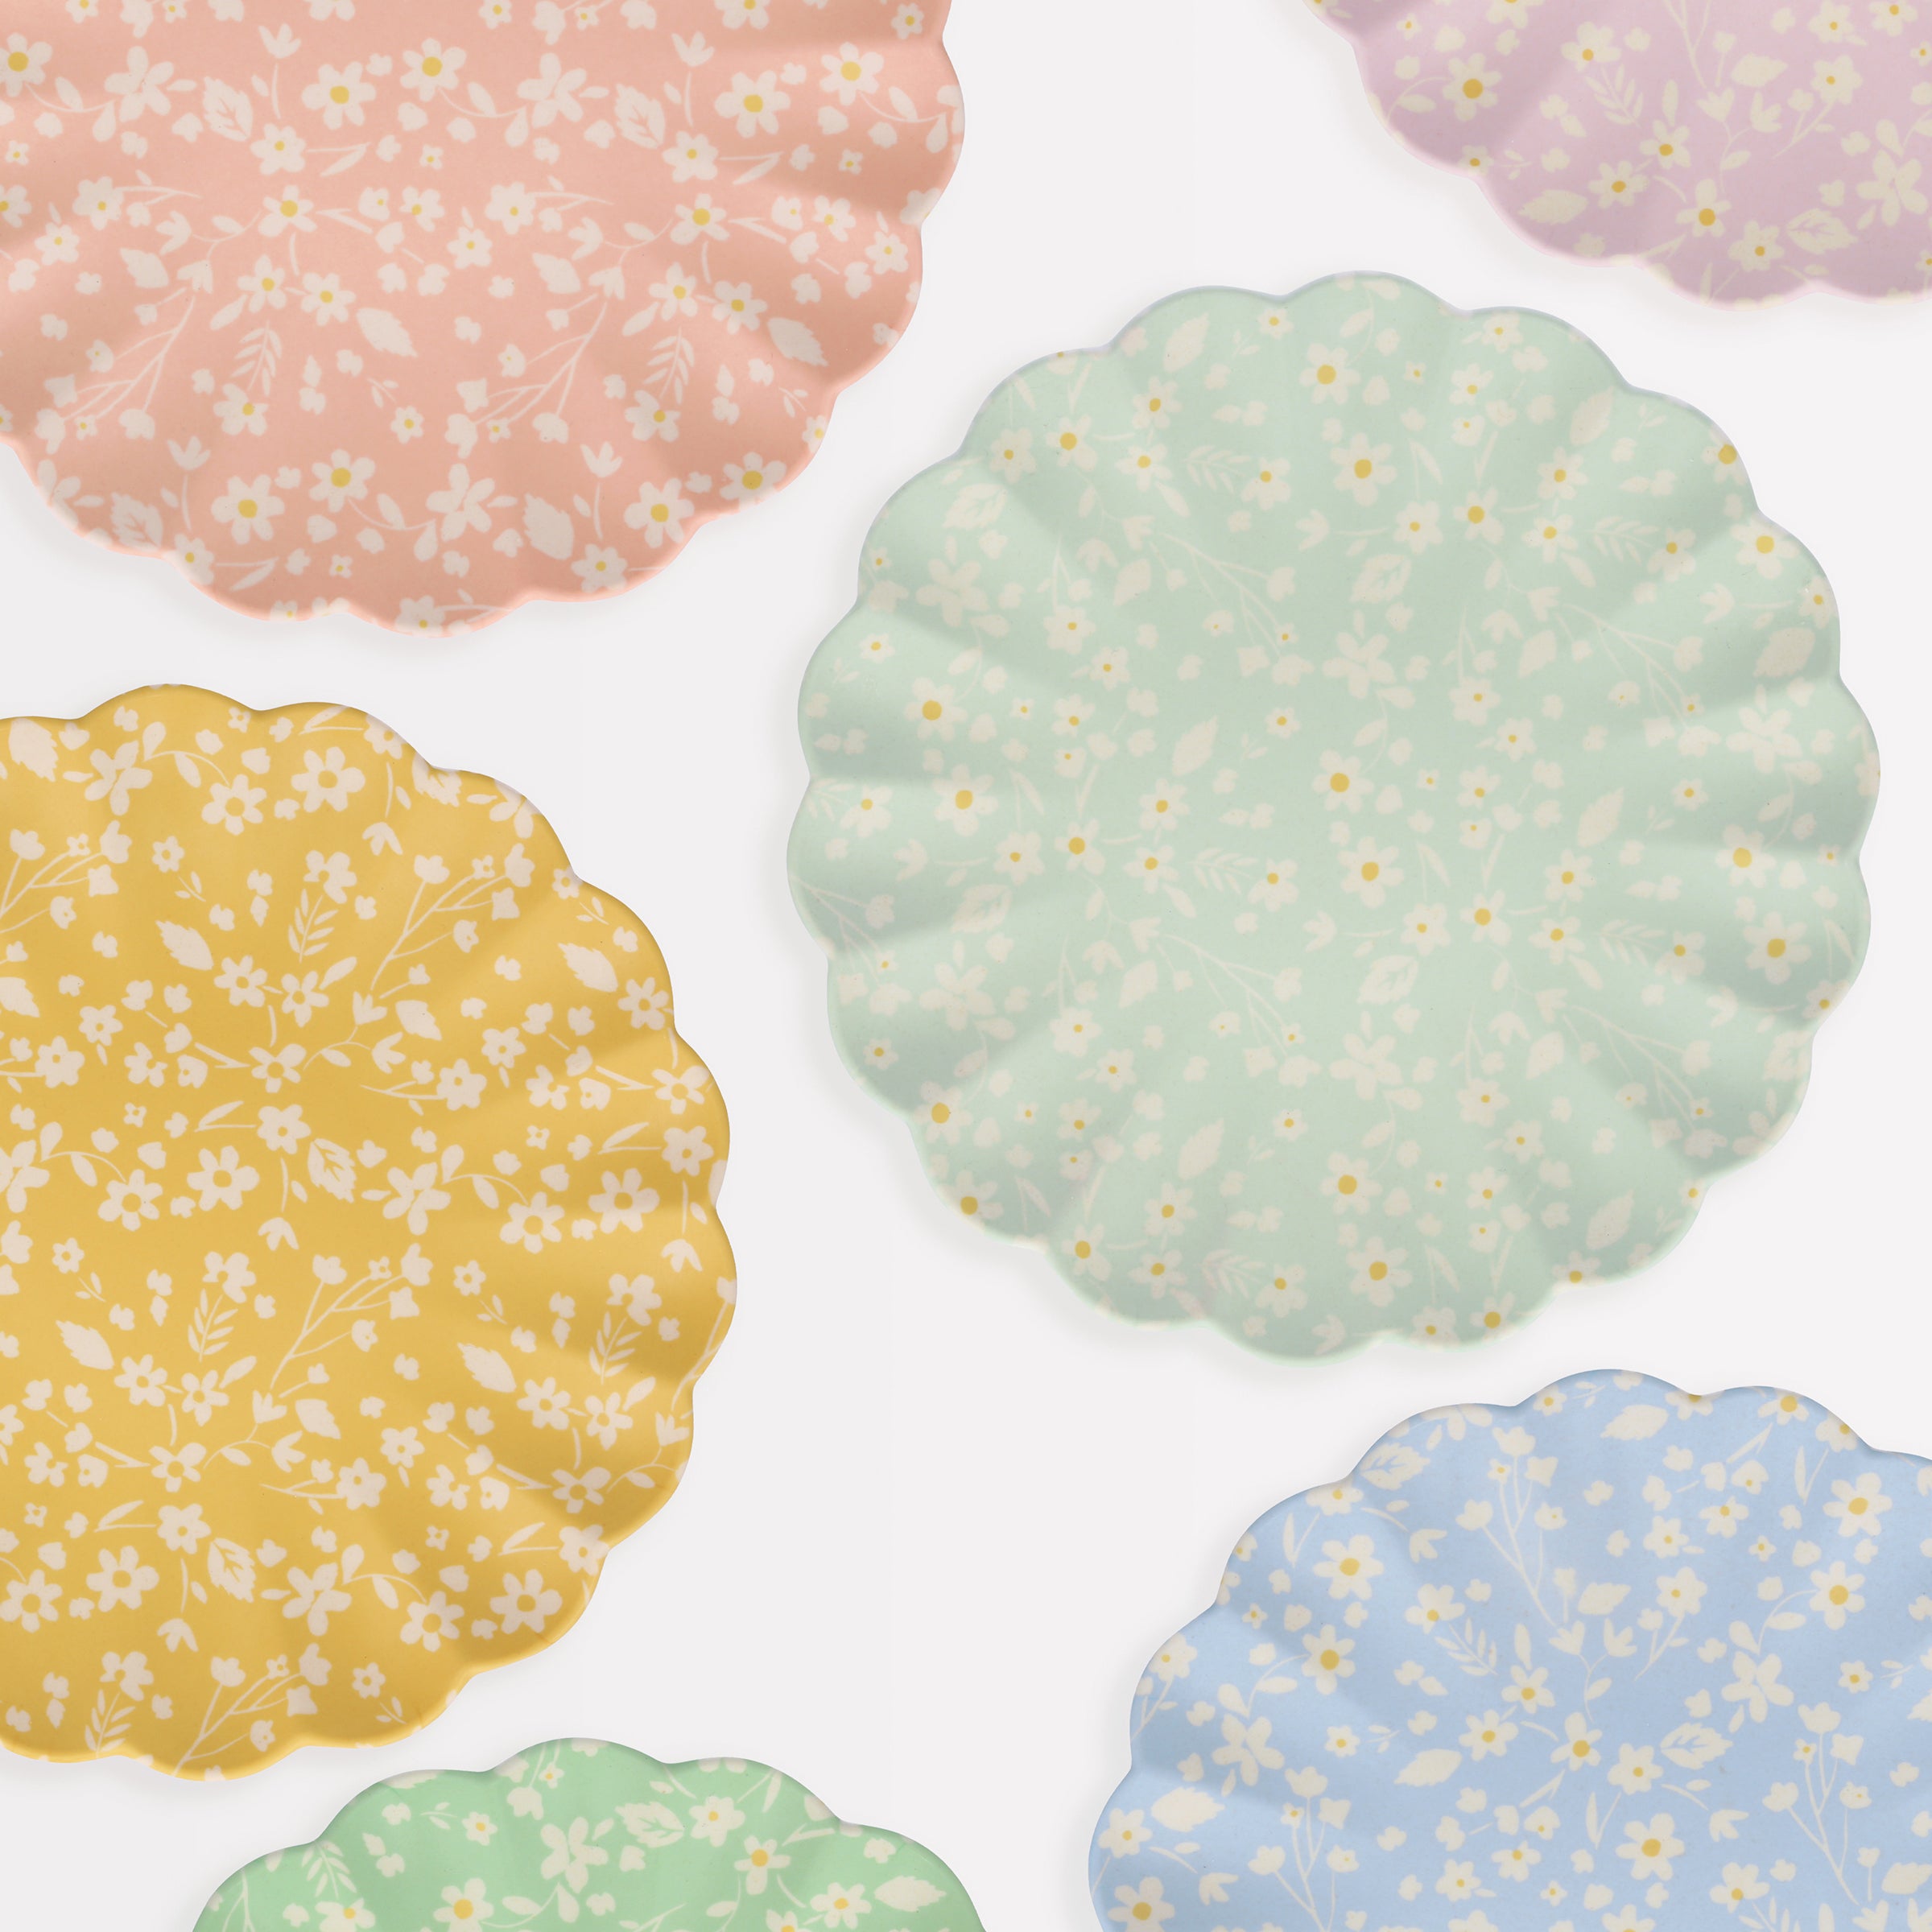 This bamboo range of plates includes floral plates in beautiful colors.